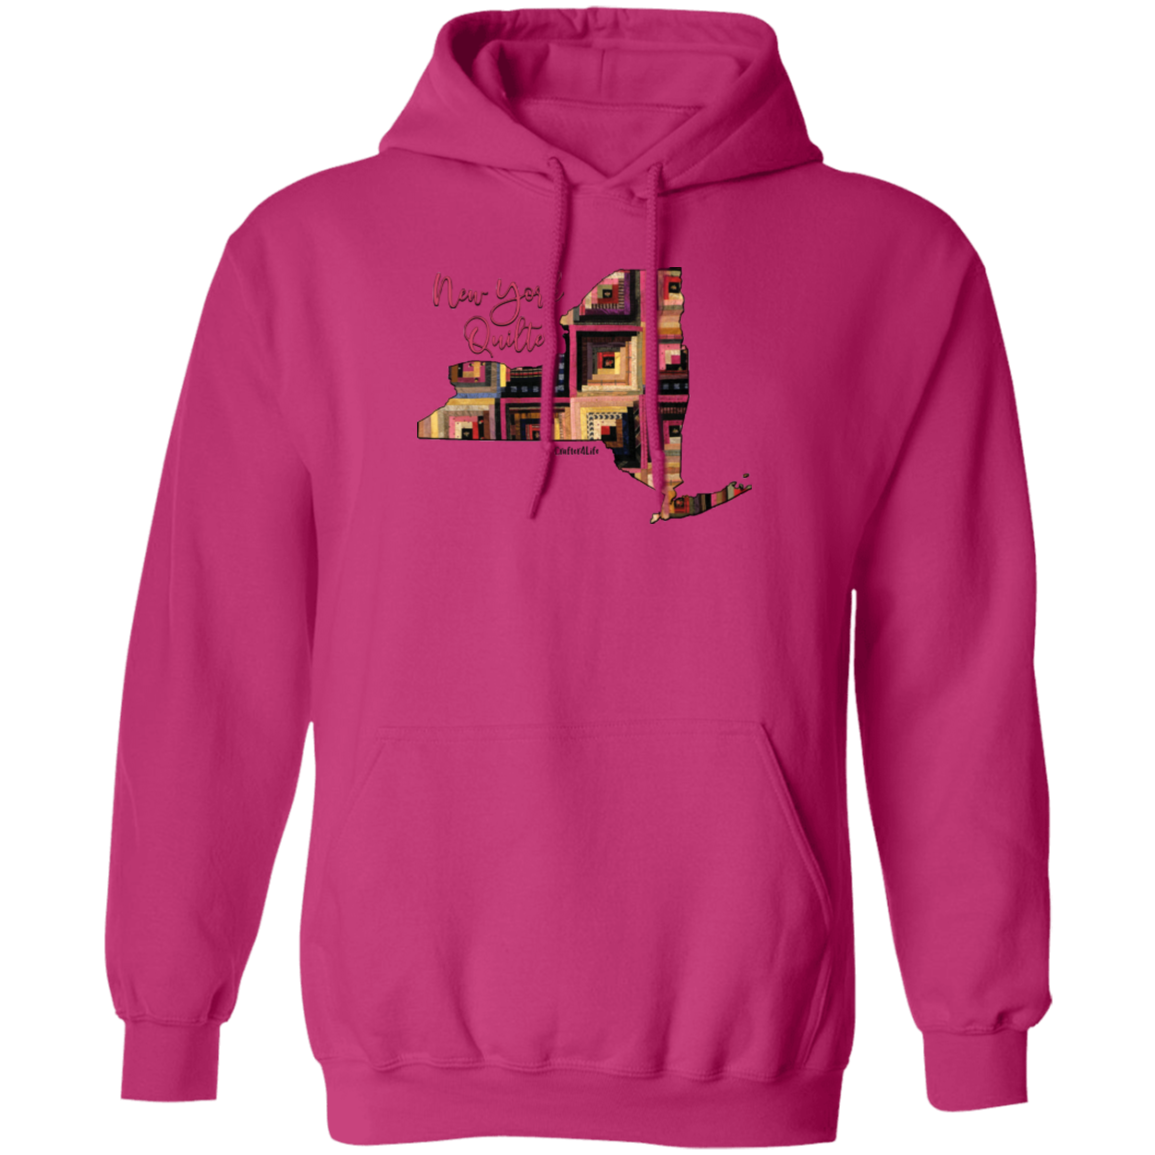 New York Quilter Pullover Hoodie, Gift for Quilting Friends and Family